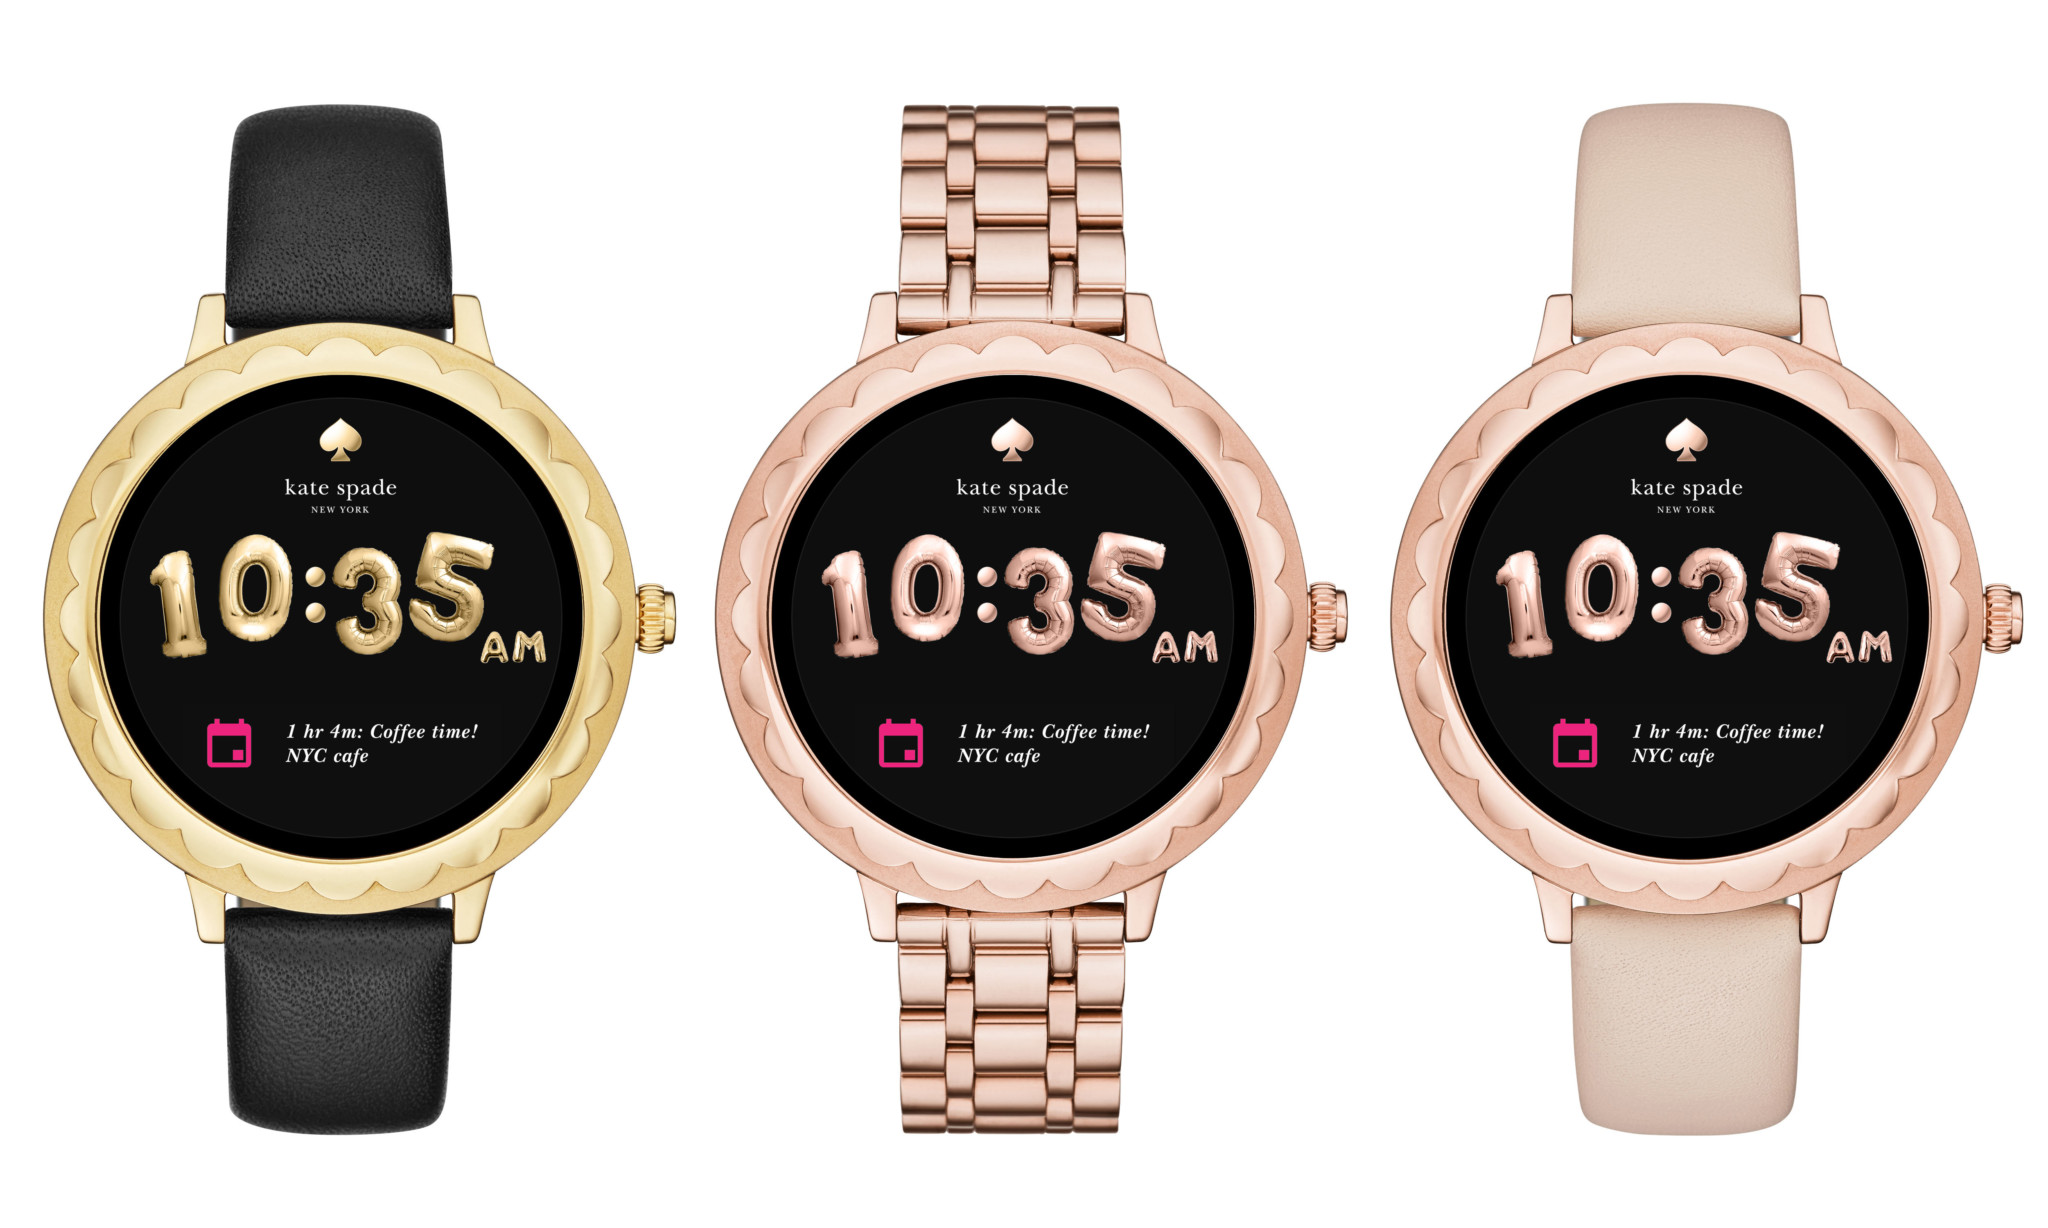 Kate spade smartwatches